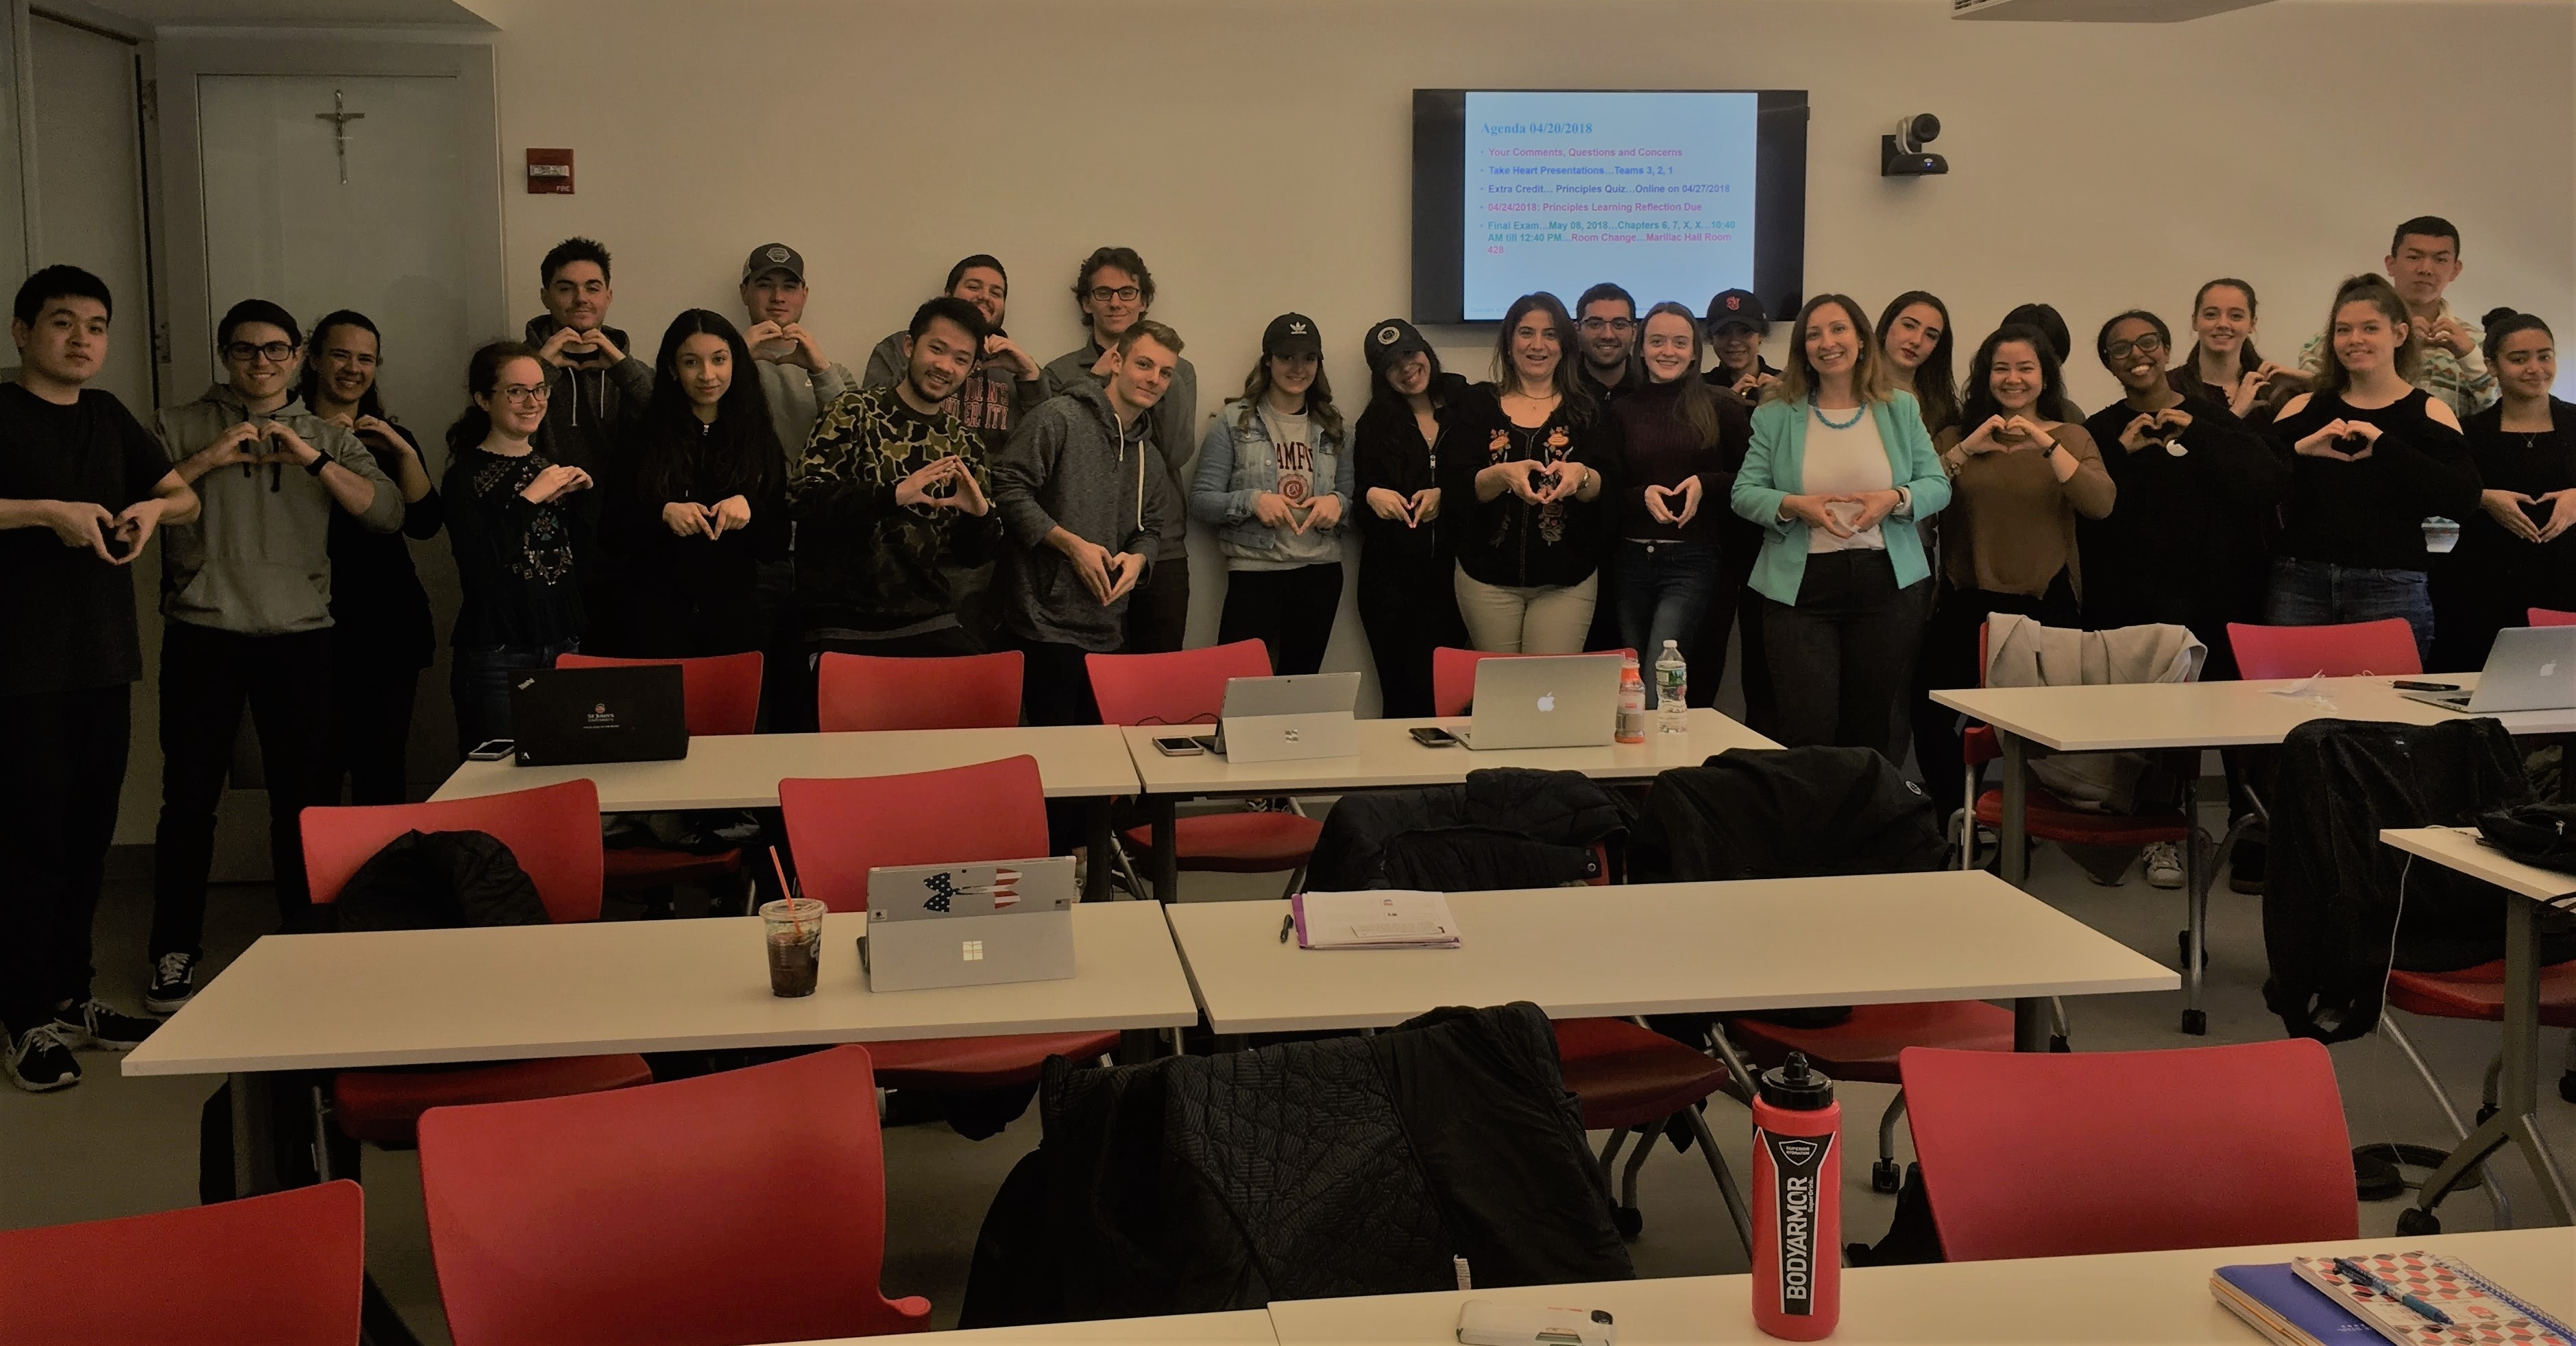 A group photo of students in Prof. Maggiore's class posing with a heart symbol made with their hands, together with Soha Sidhom from Mission Take Heart and Anna Zak from AS-L.